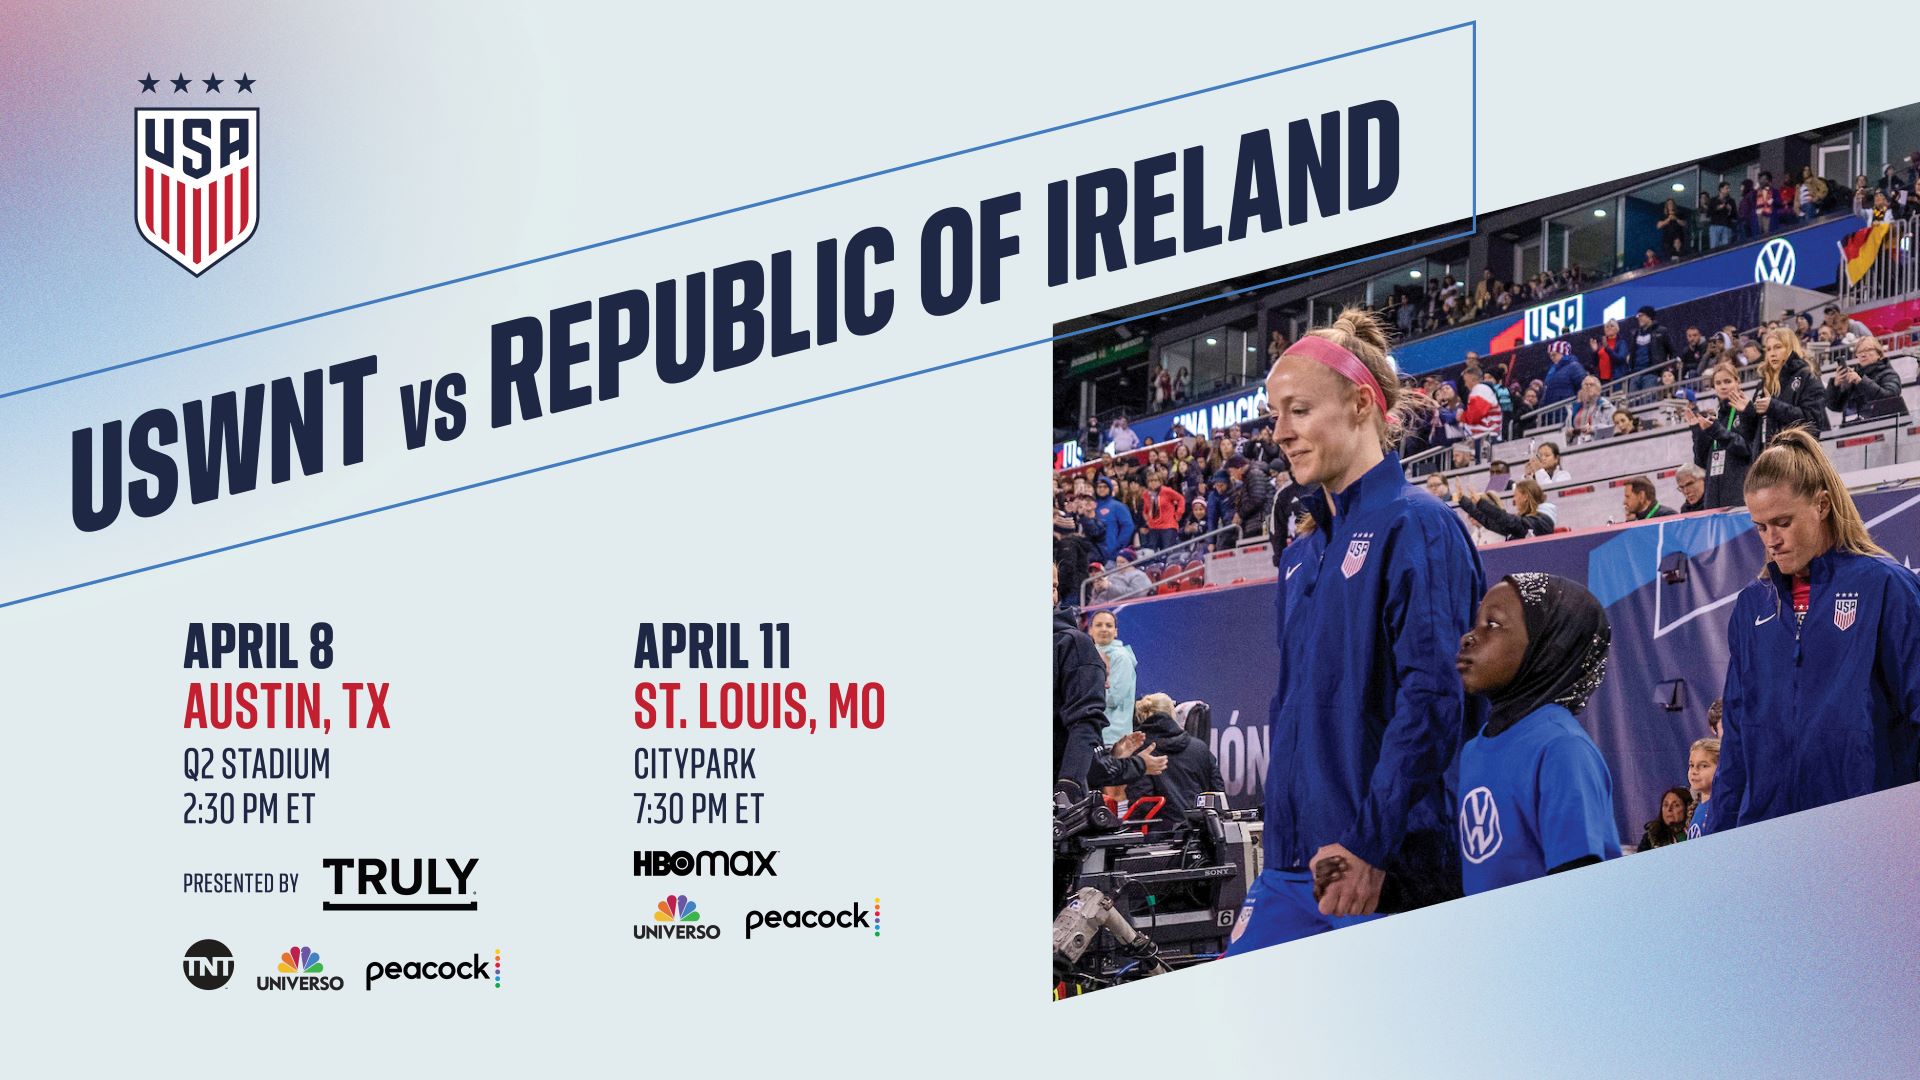 U.S. Womens National Team Will Face 2023 Womens World Cup Debutante Republic Of Ireland On April 8 In Austin, Texas Presented By Truly Hard Seltzer, And April 11 In St